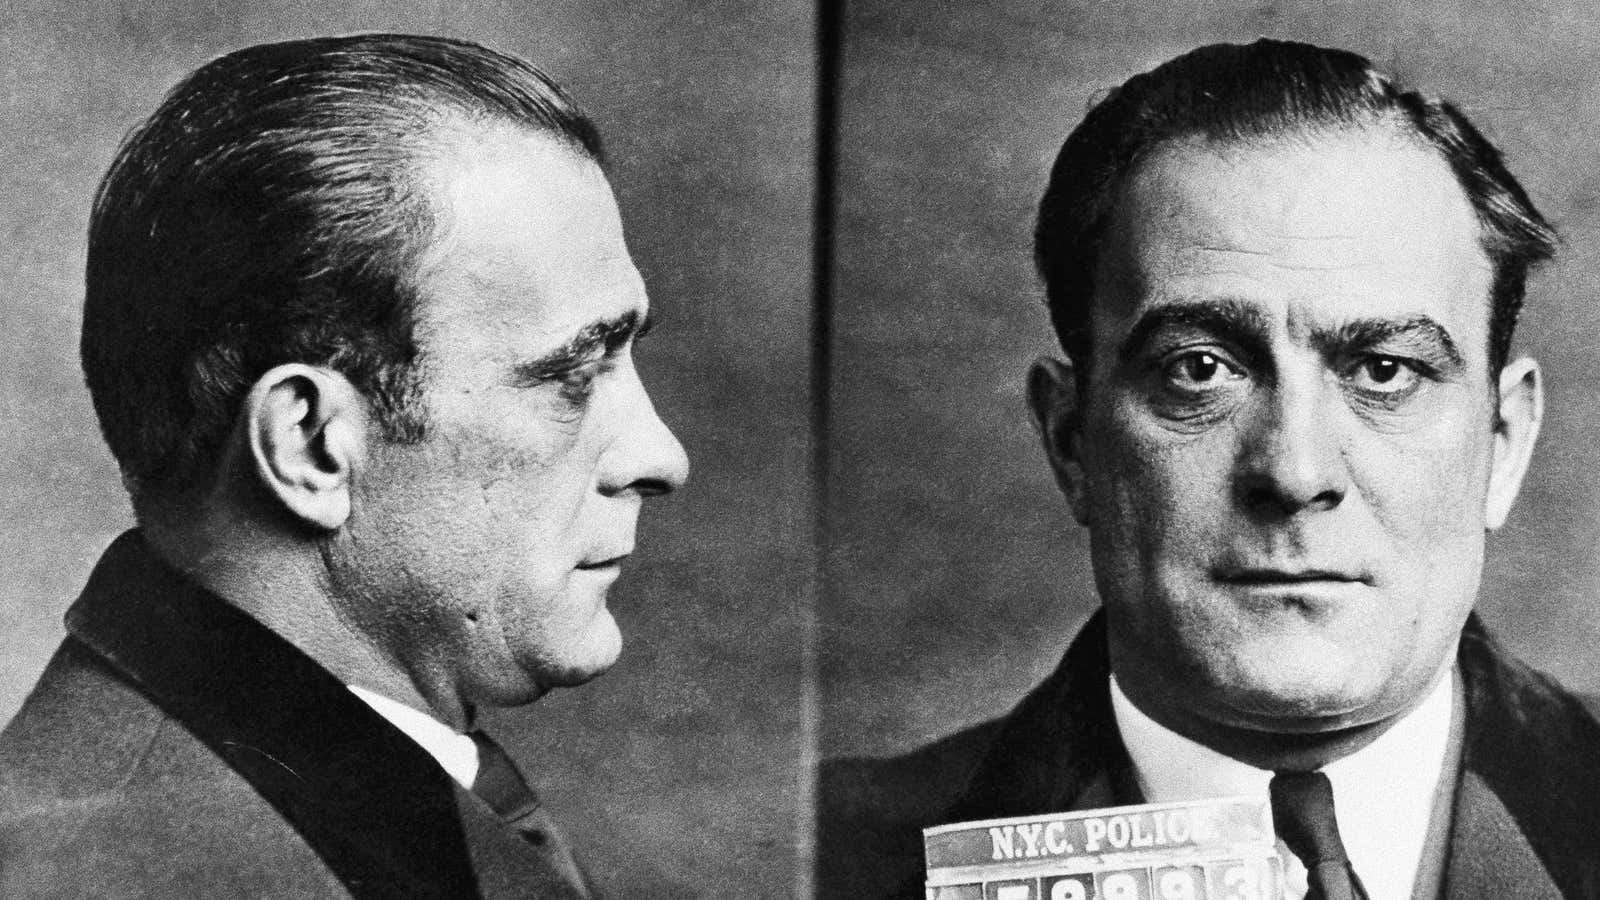 Vito Genovese, one of the fathers of the crime family.